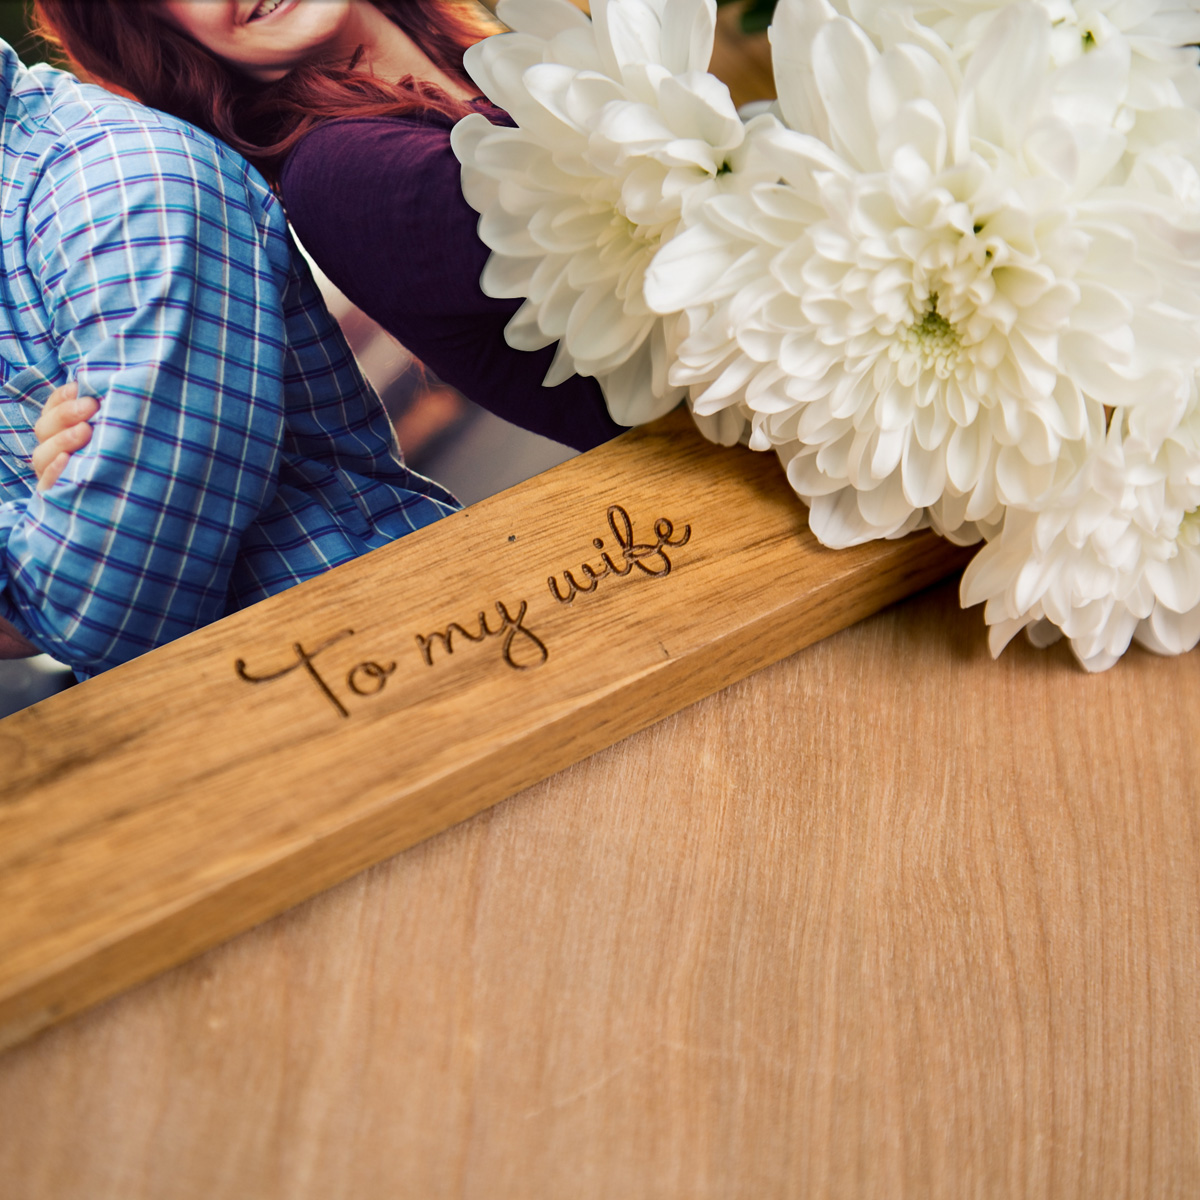 Personalised Wooden Photo Frame - Any Message